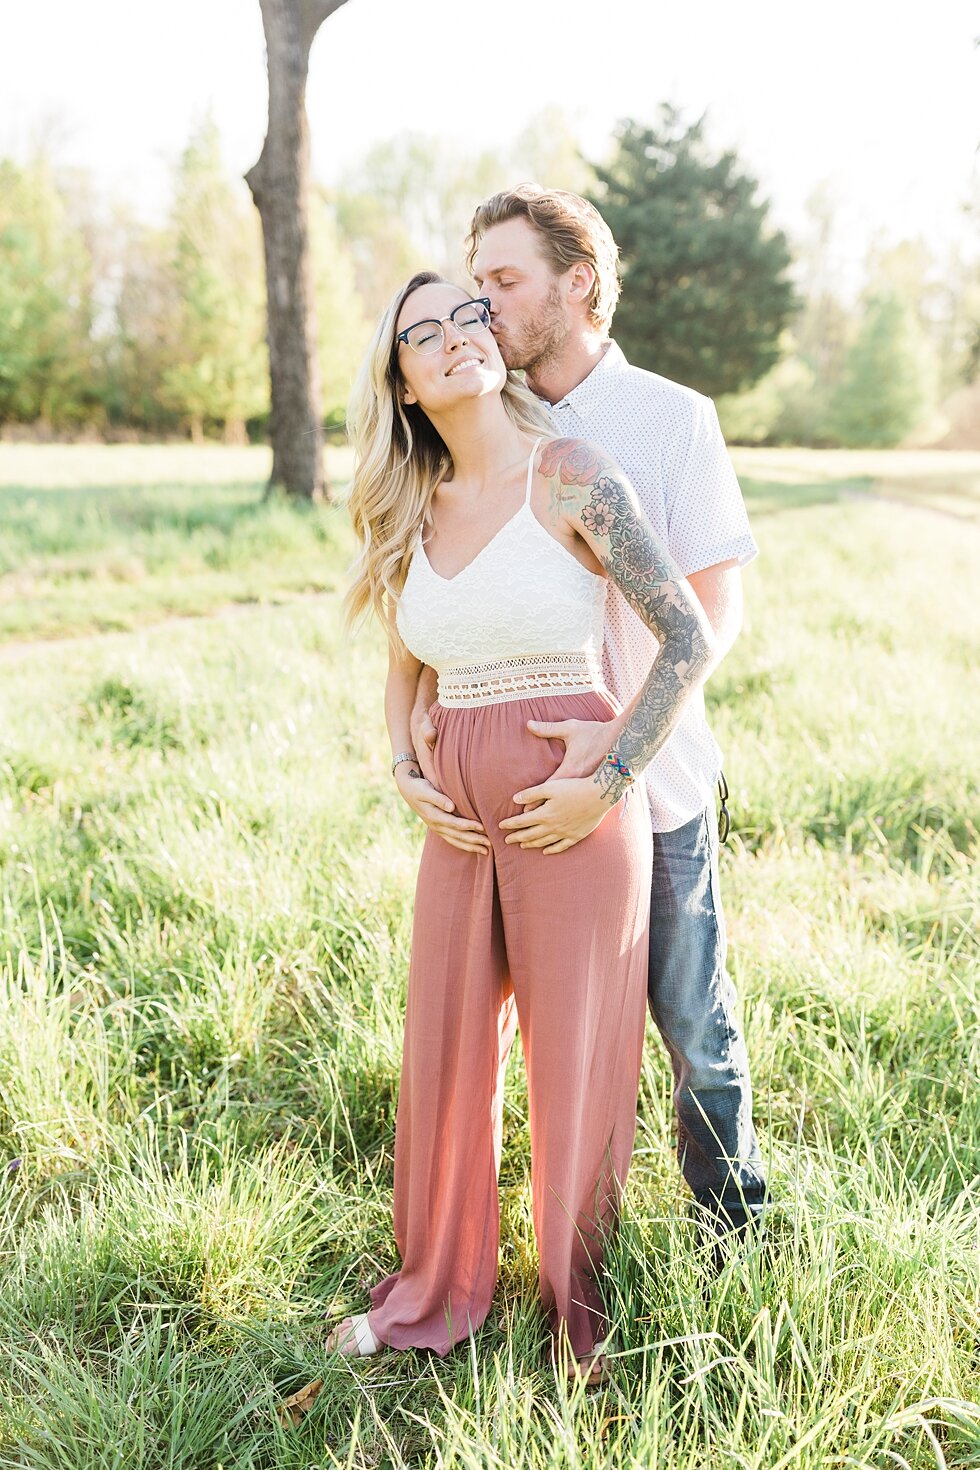  Natural laughs shared during this southern spring wedding! announcement for a southern spring session. couple baby on the way expecting excited maternity photography congratulations announcement baby coming soon #padbl #padblmaternity #padblmaternit